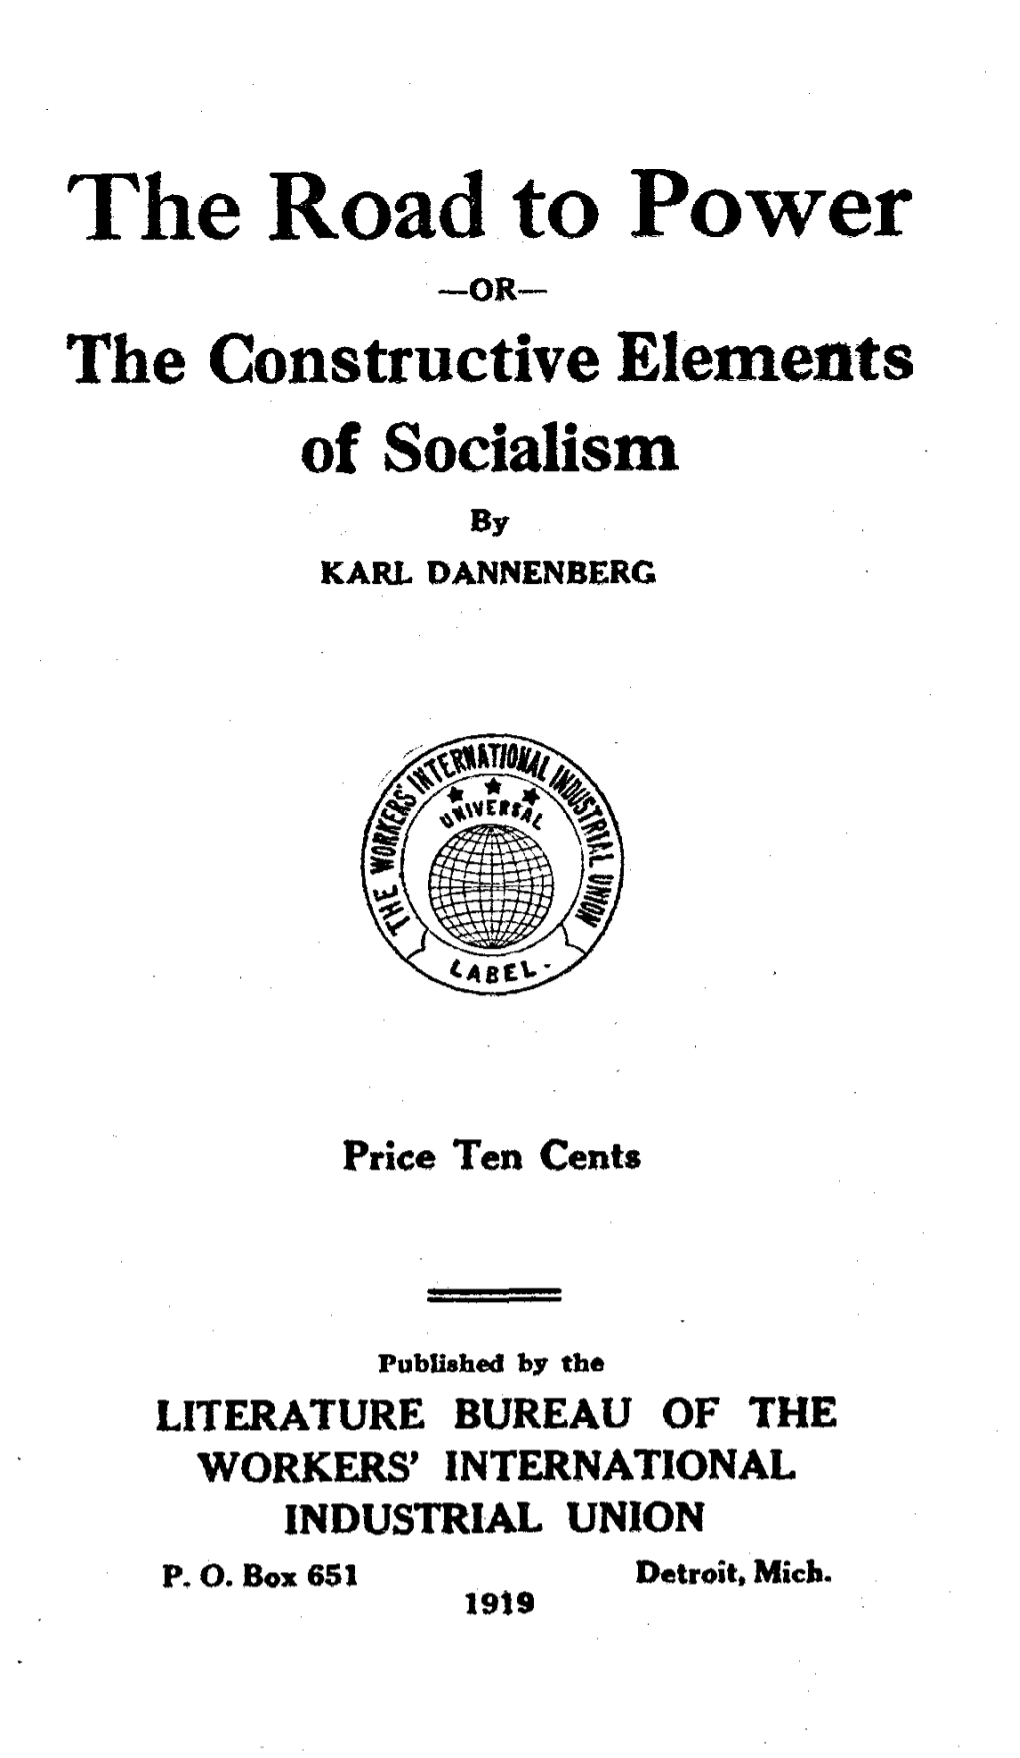 The Road to Power -OR- the Constructive Elements of Socialism by KARL DANNENBERC